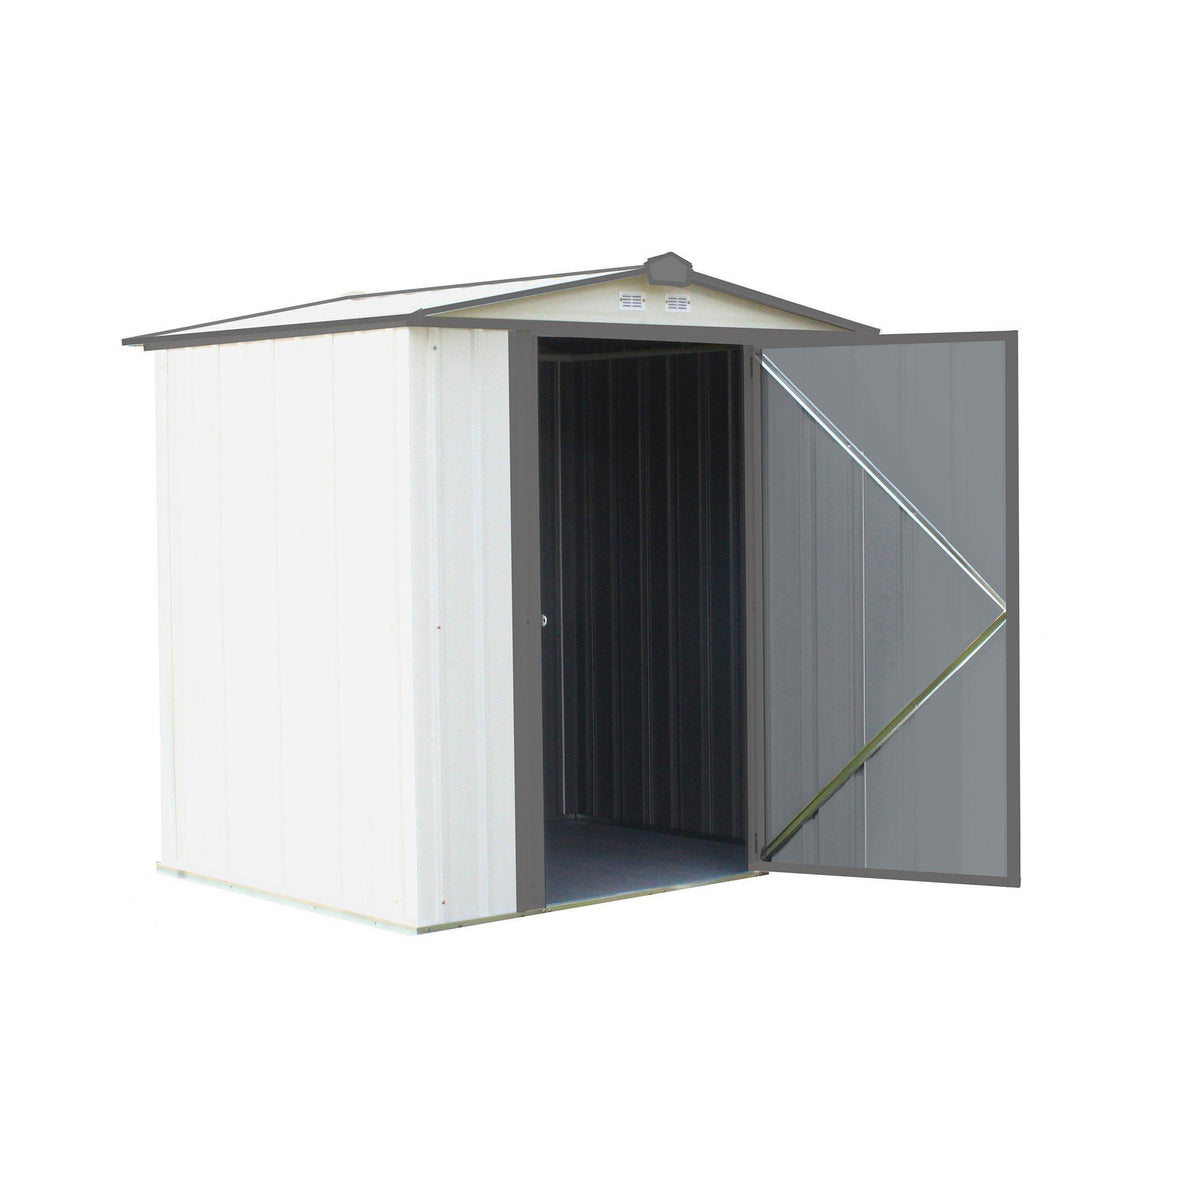 Arrow EZEE Shed Low Gable Steel Storage Shed, Cream/Charcoal Trim, 6 x 5 ft.